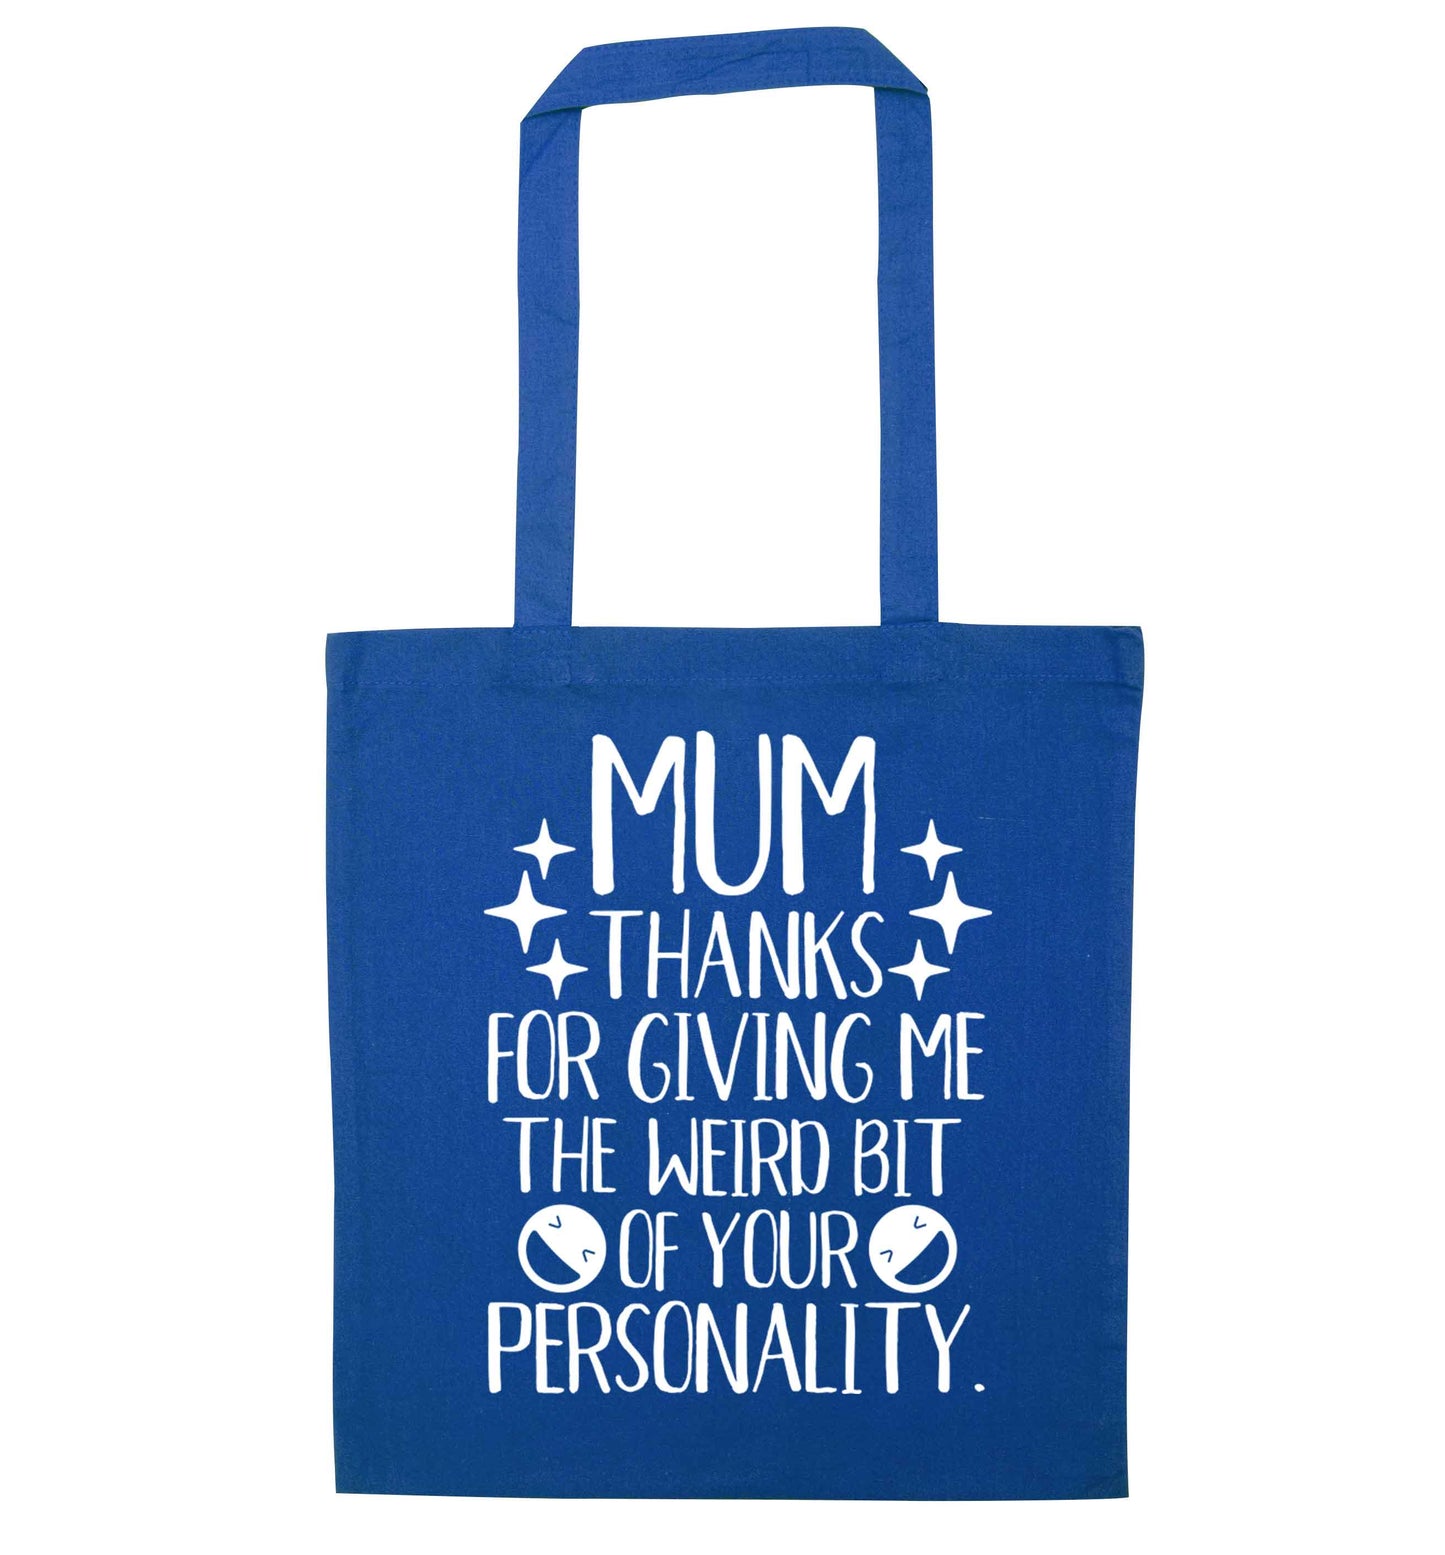 Mum, I love you more than halloumi and if you know me at all you know how deep that is blue tote bag